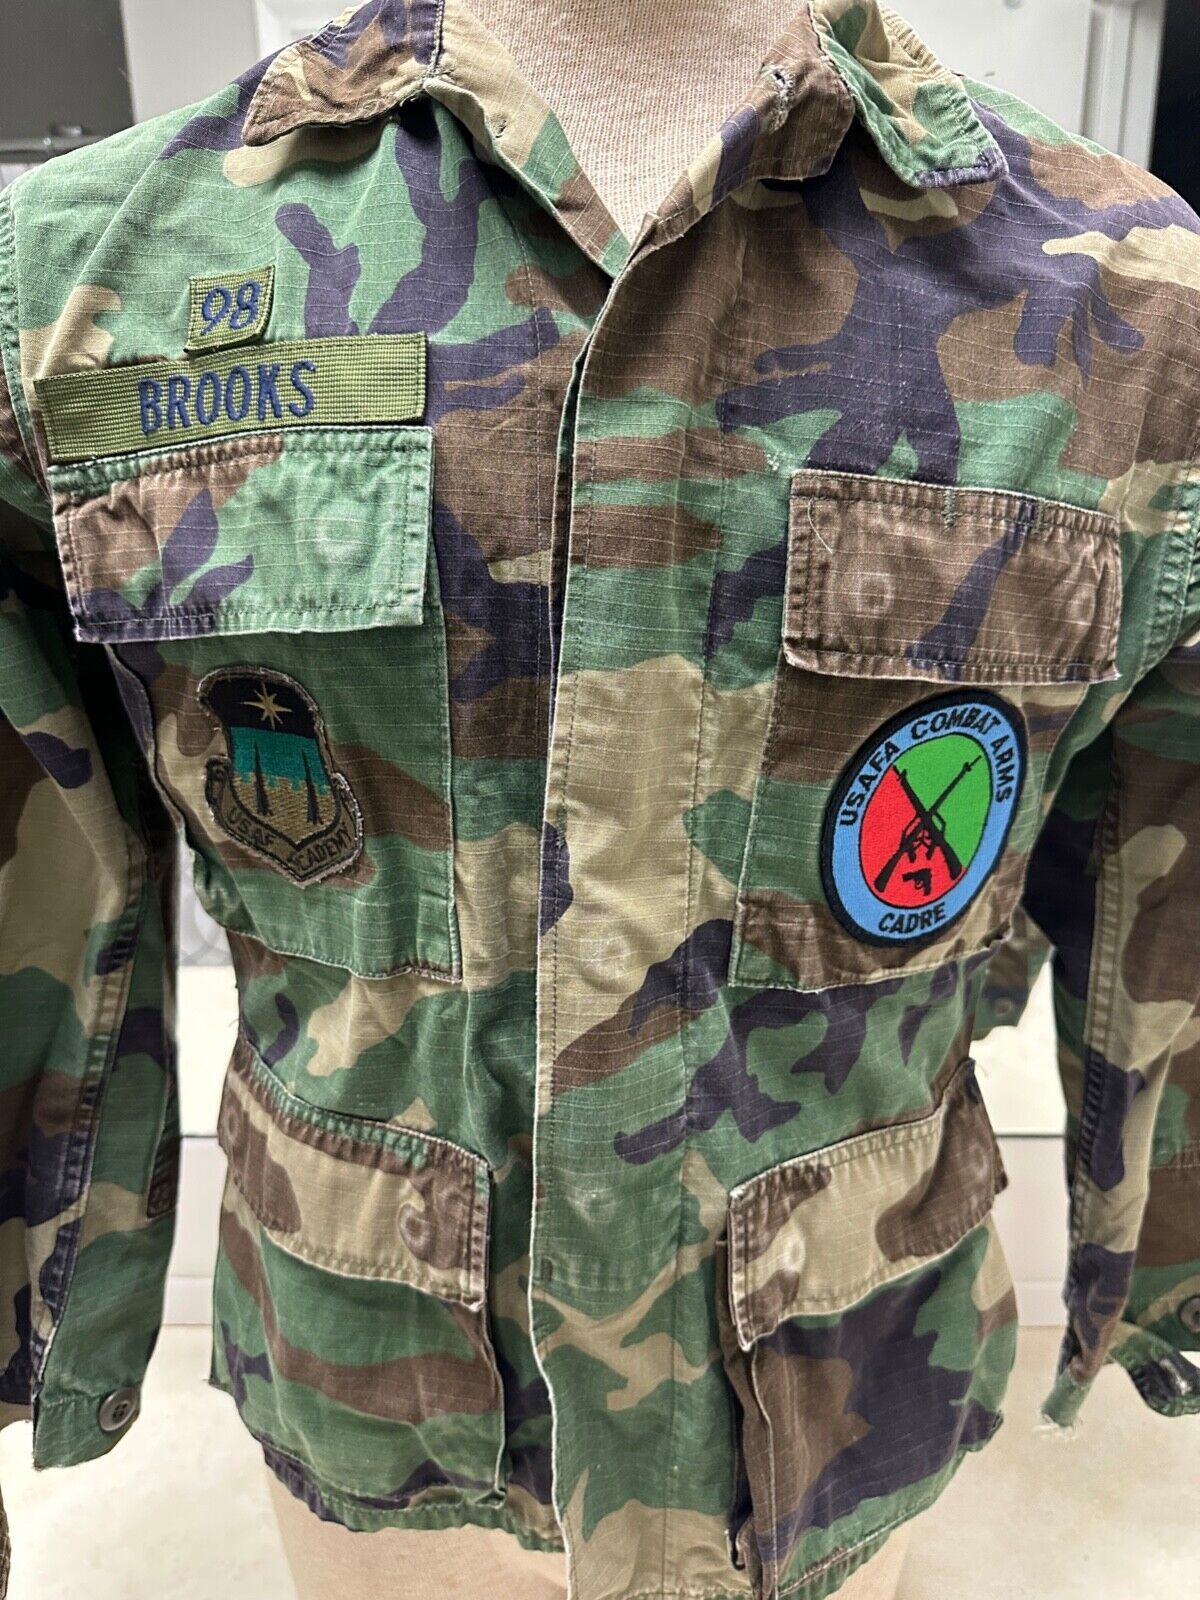 USAF Academy Cammo Shirt W/Patches - Size XSMALL